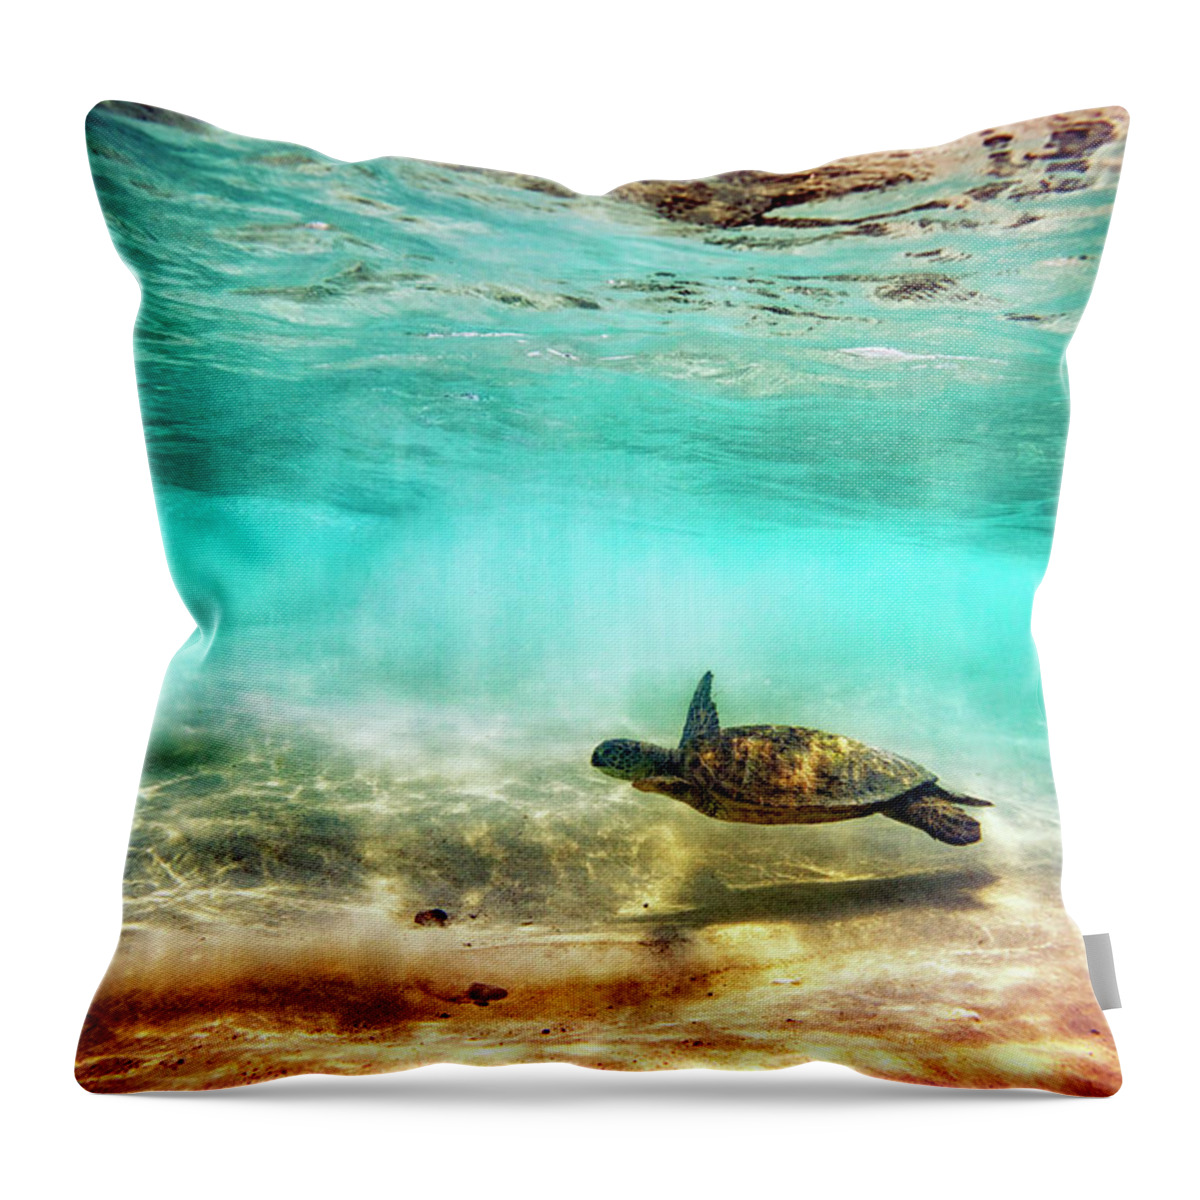 Turtle Throw Pillow featuring the photograph Kua Bay Honu by Christopher Johnson